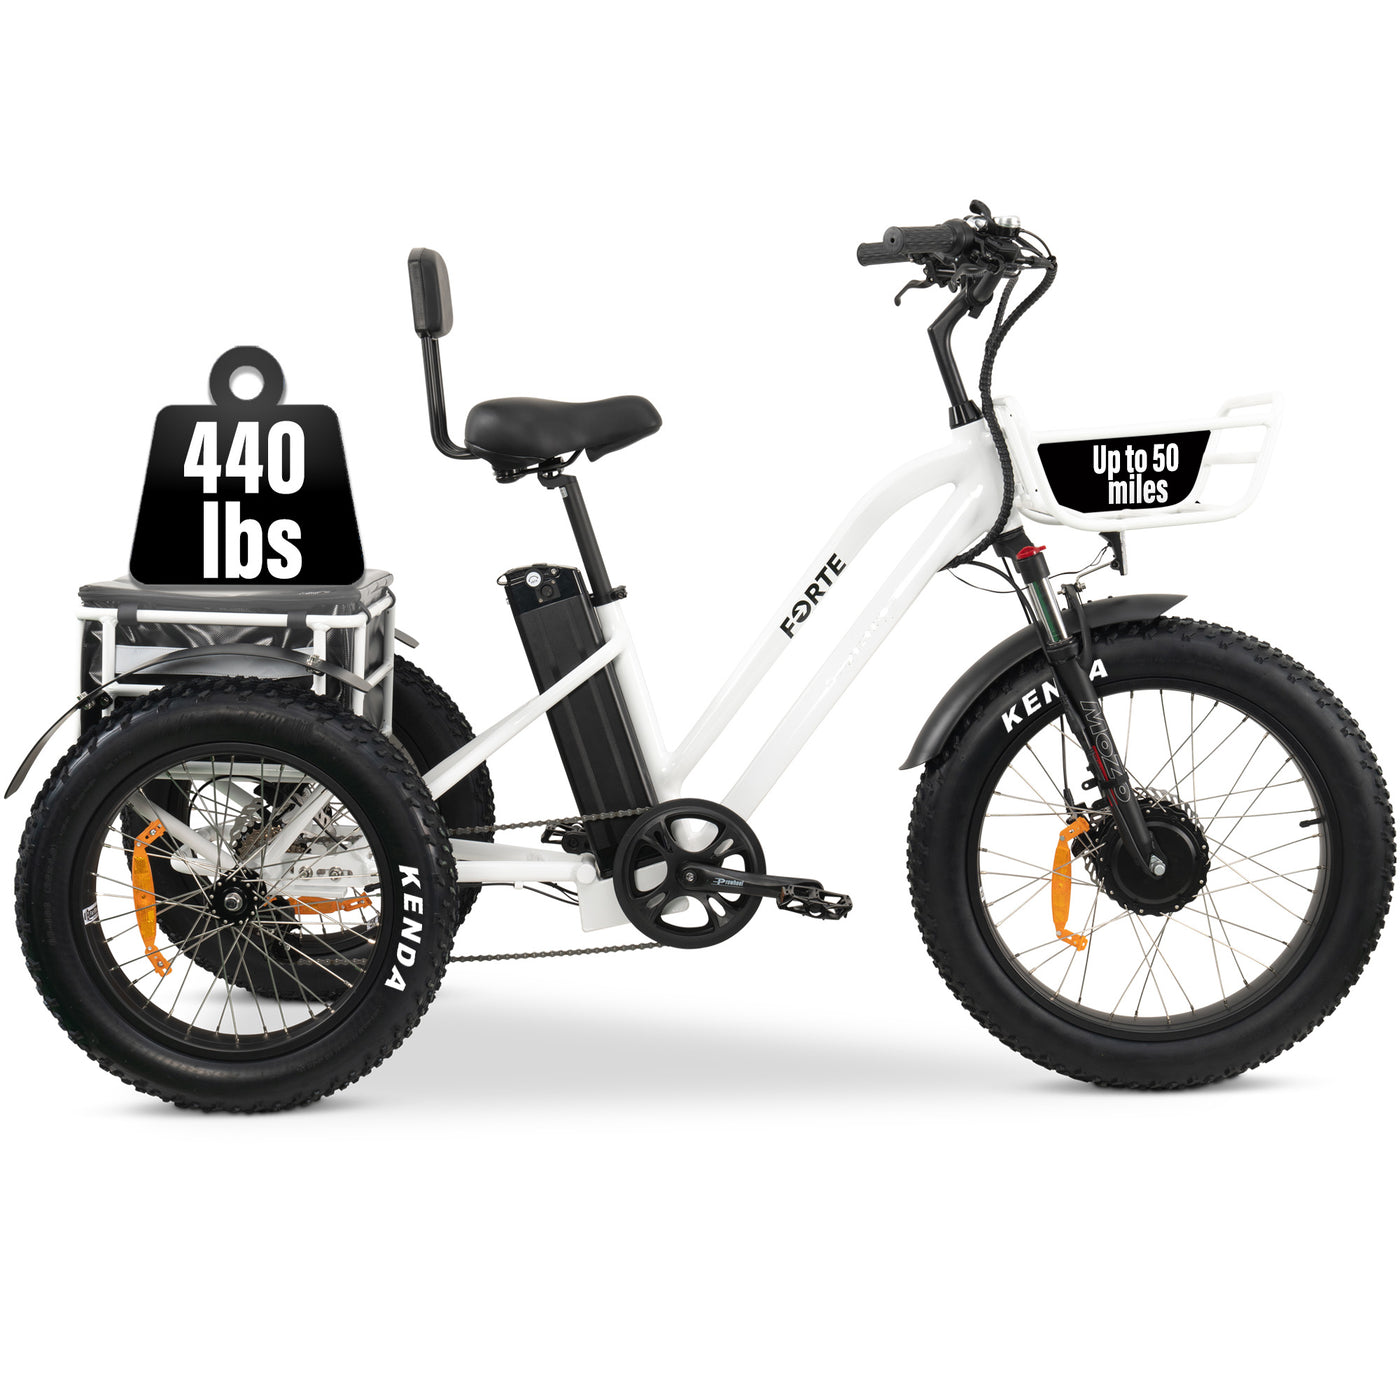 FORTE Electric Tricycle Bicycle White Frame 50 miles